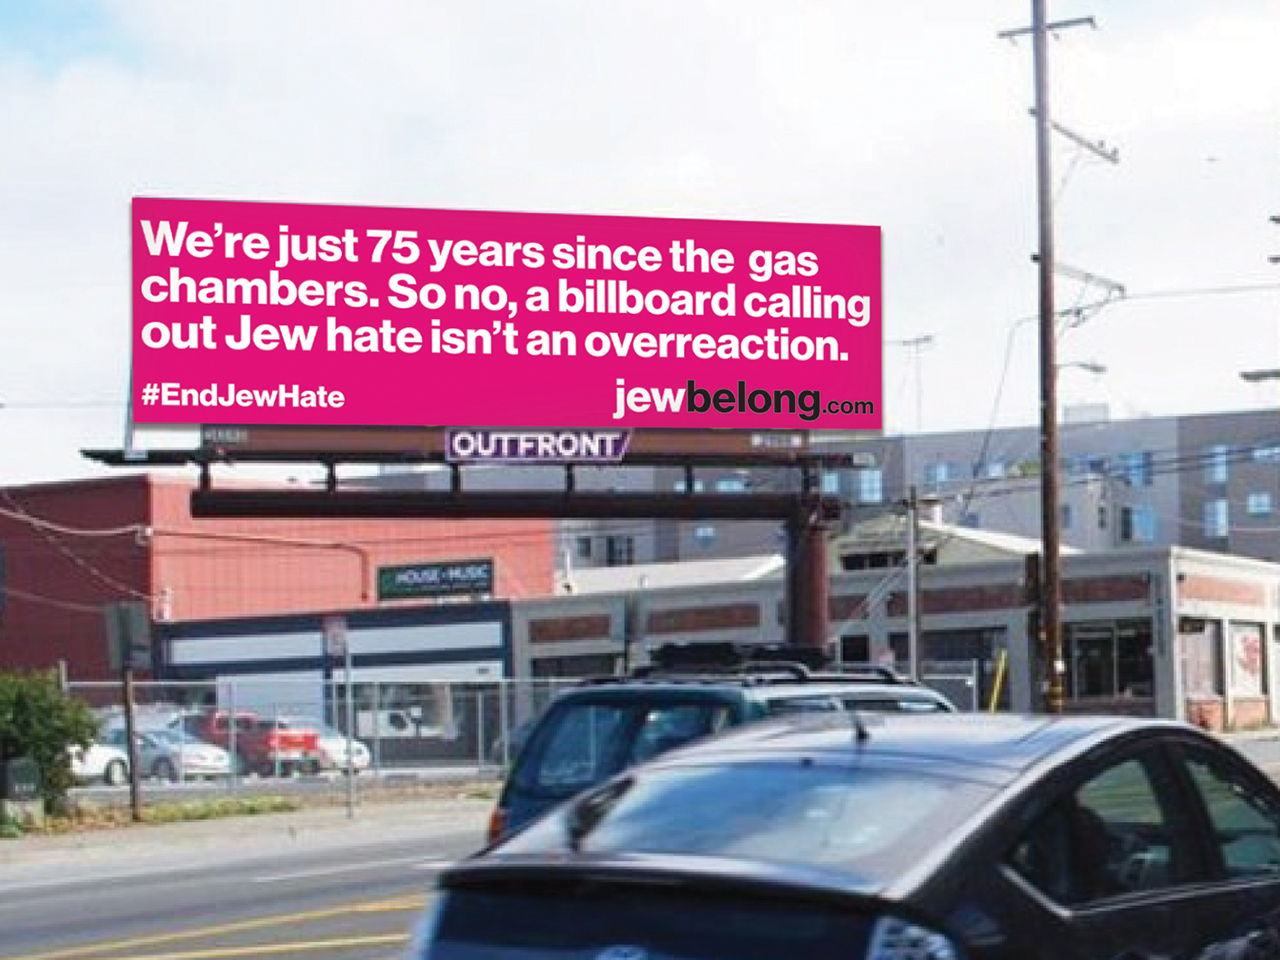 Mockup of one of the JewBelong billboards that will be on display in San Francisco from Feb. 7 through March 13, 2022.